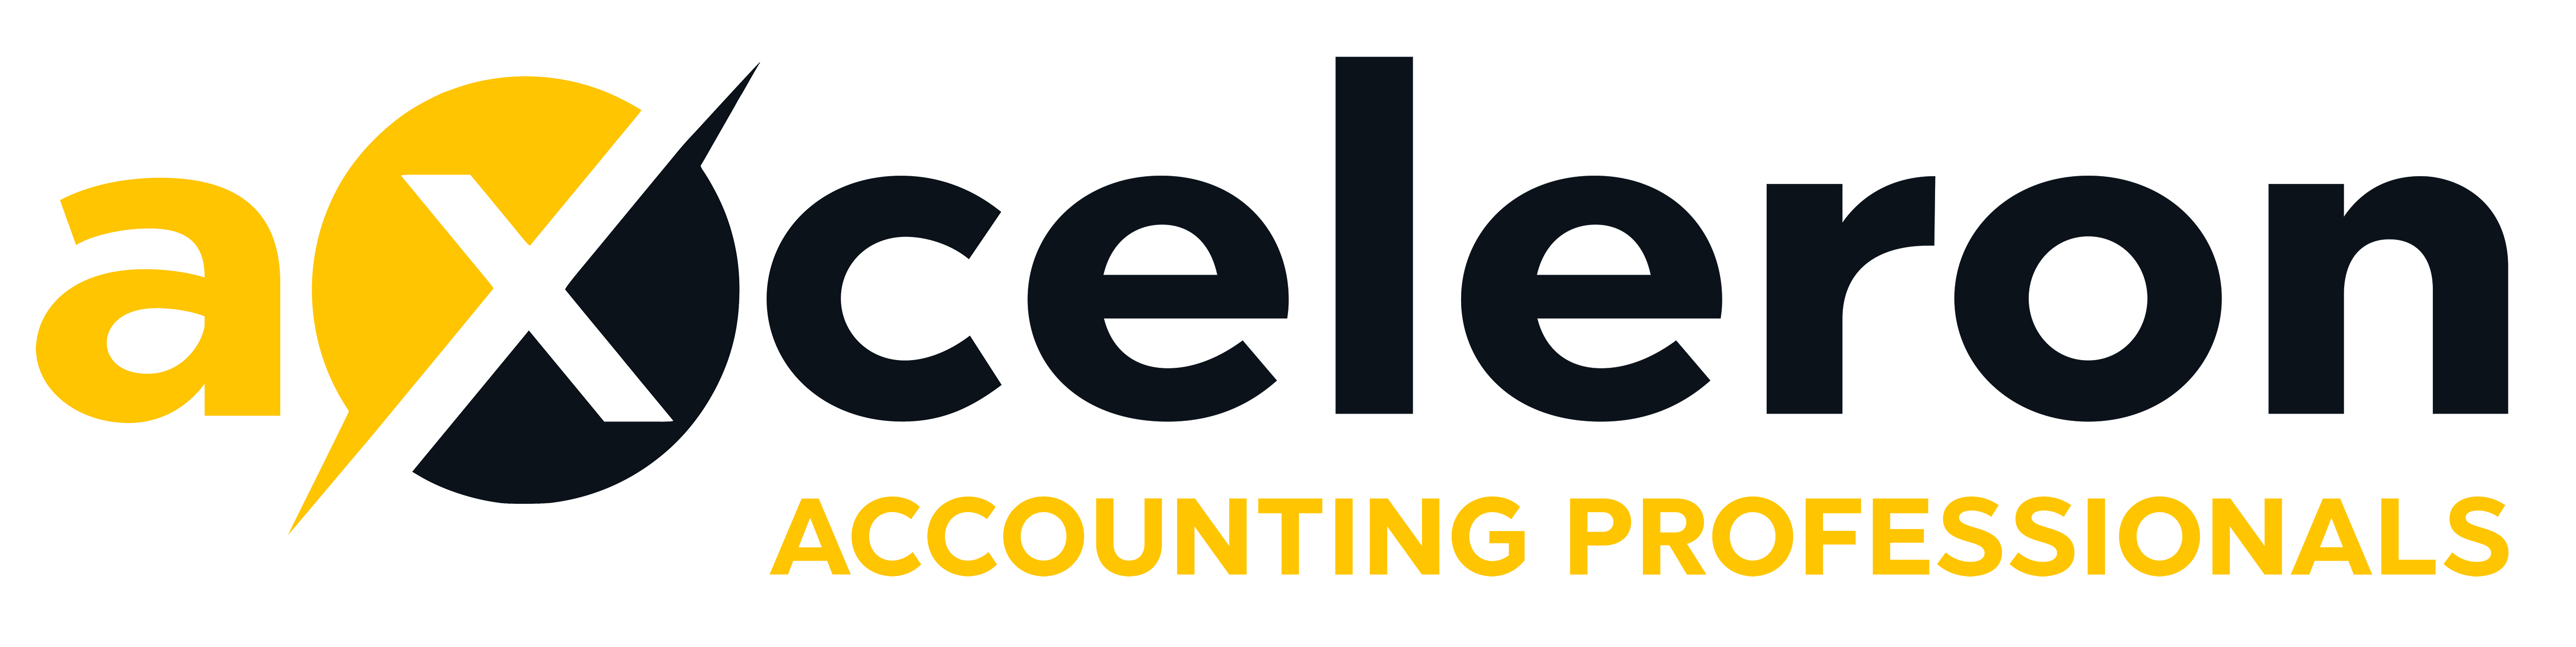 axceleron-accounting-professionals